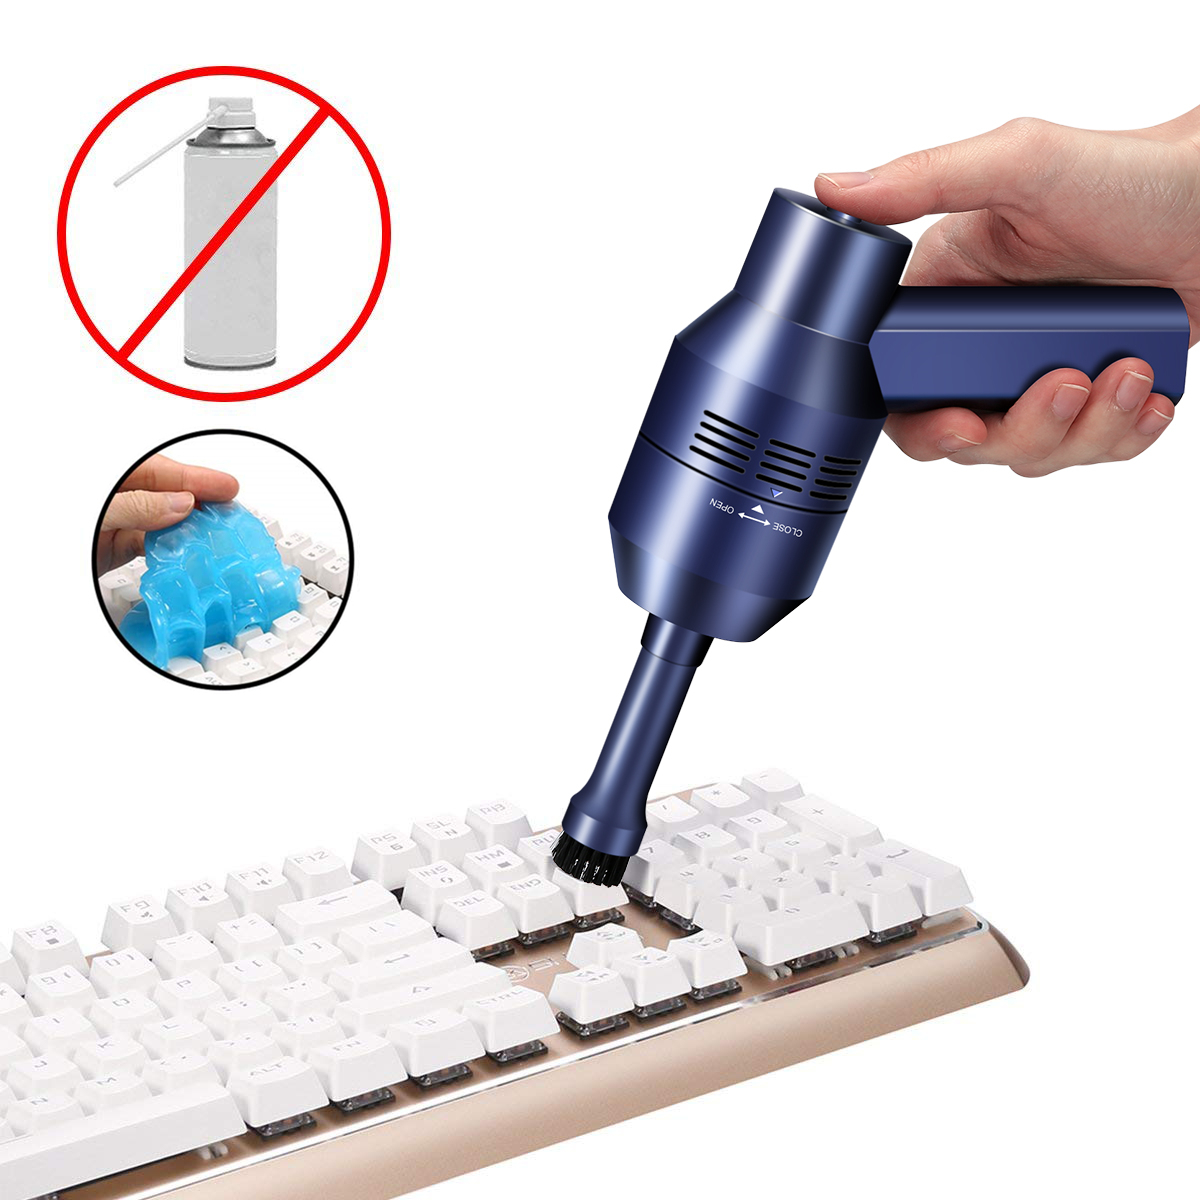 MECO-Rechargeable-Mini-Vacuum-Cordless-Vacuum-Desk-Vacuum-Cleaner-Keyboard-Cleaner-with-Cleaning-Bru-1638235-1